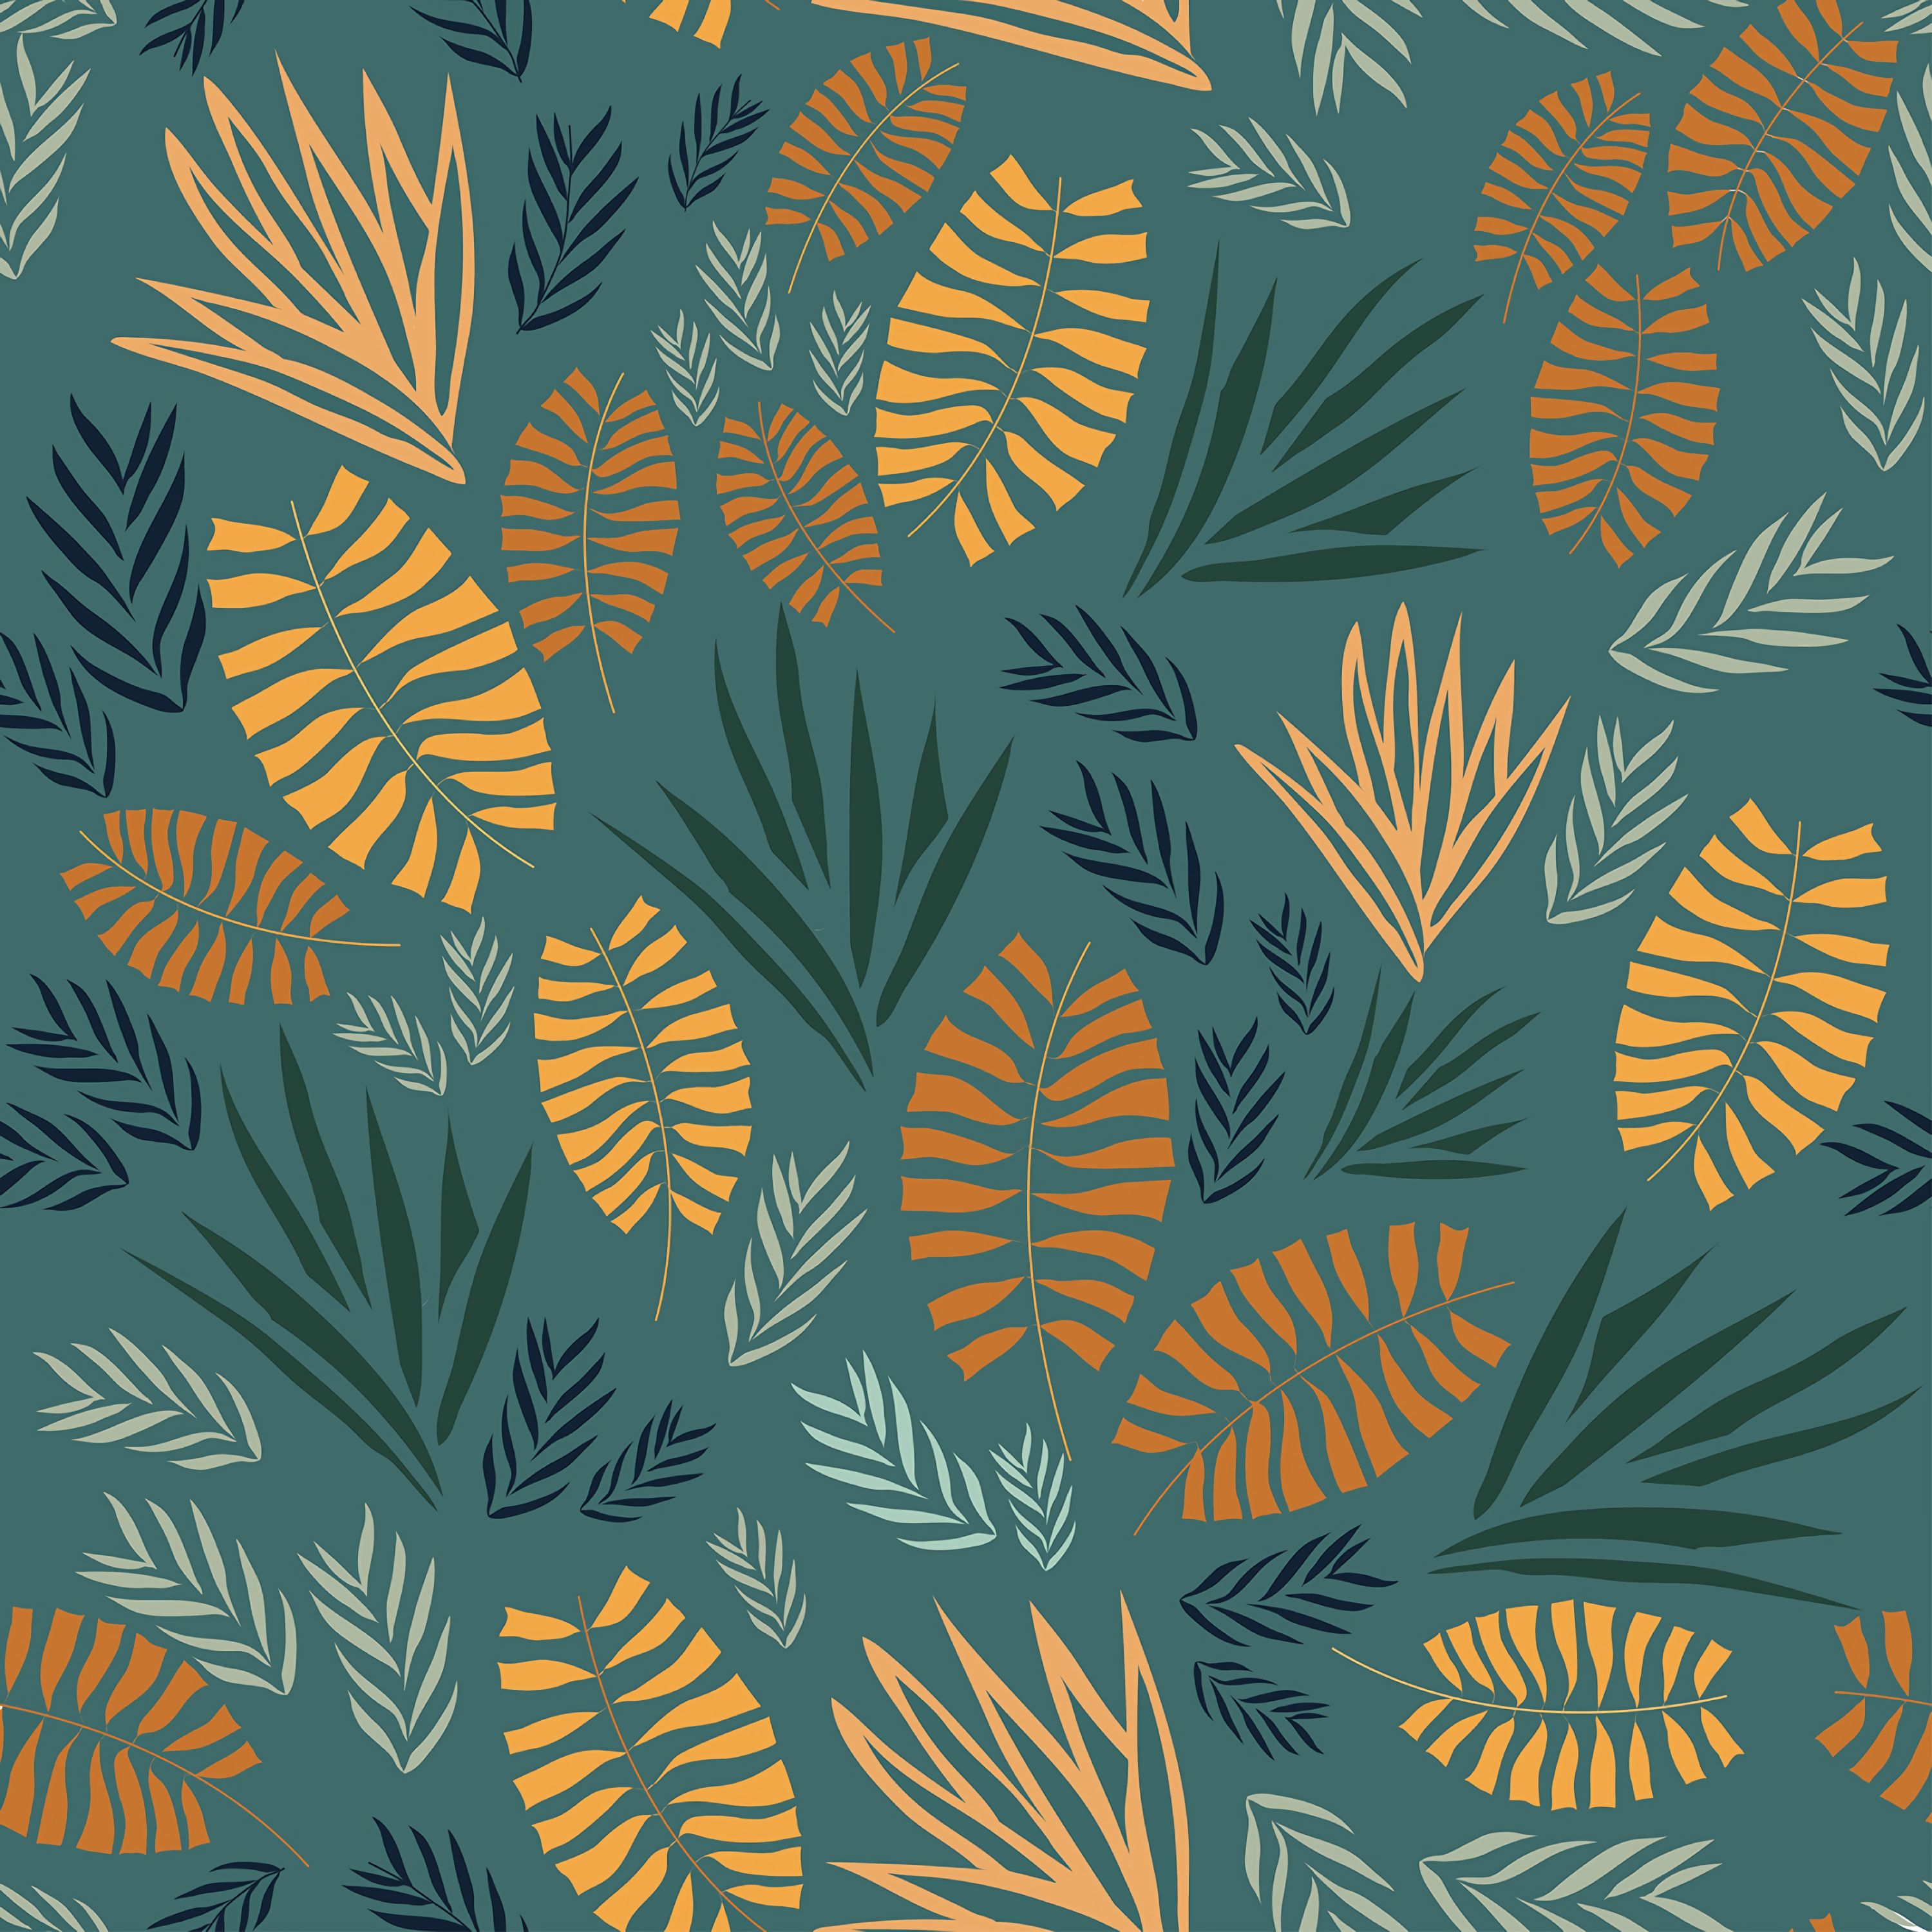 patterns, textures, leaves, plants, pattern, texture iphone wallpaper